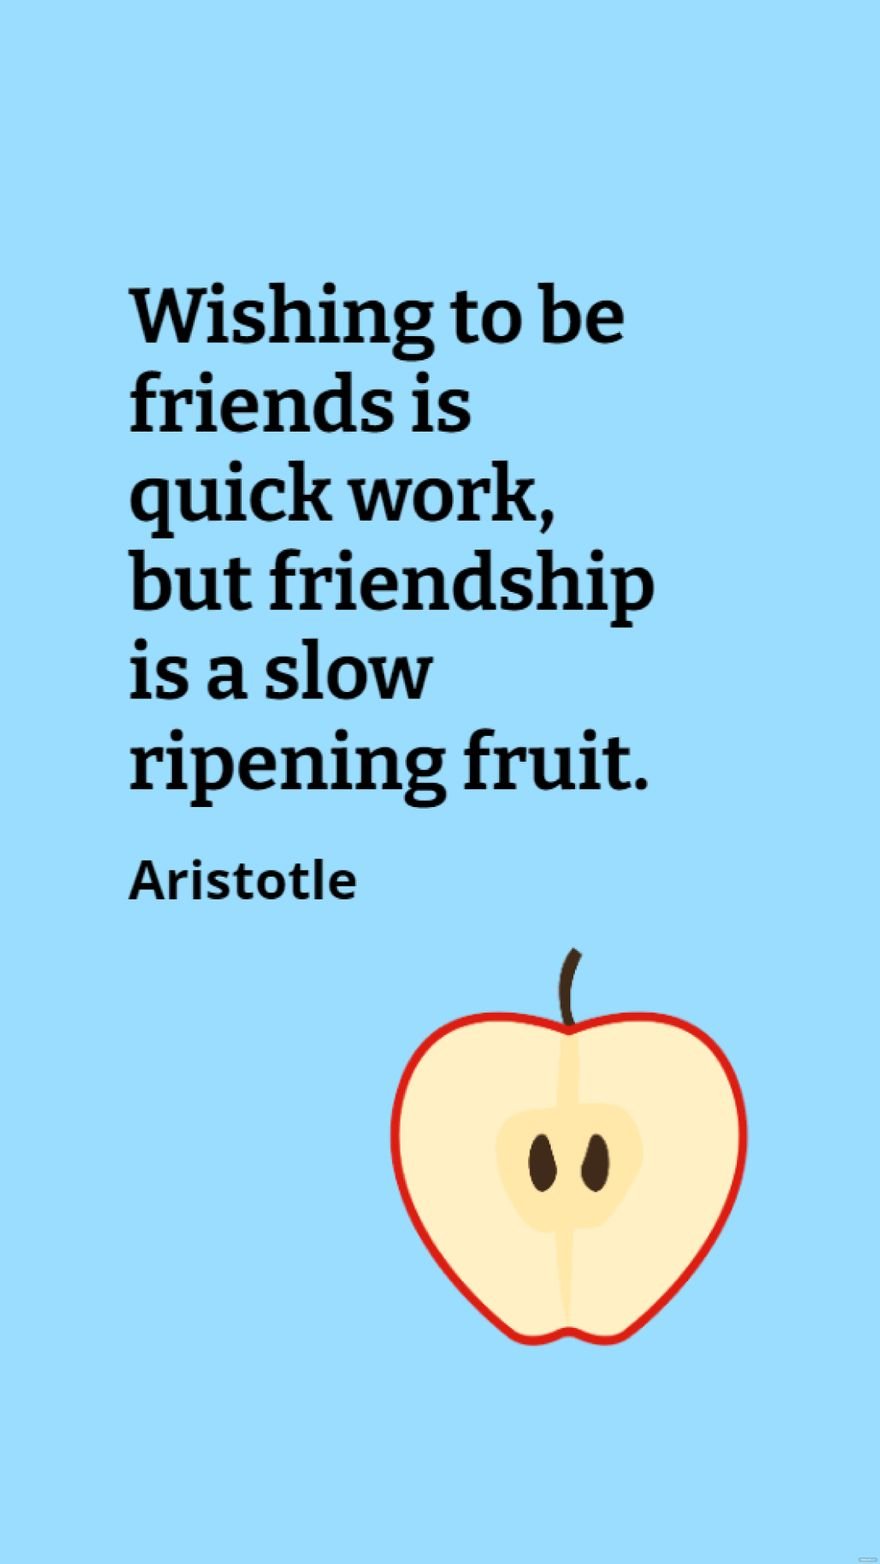 Aristotle - Wishing to be friends is quick work, but friendship is a slow ripening fruit.